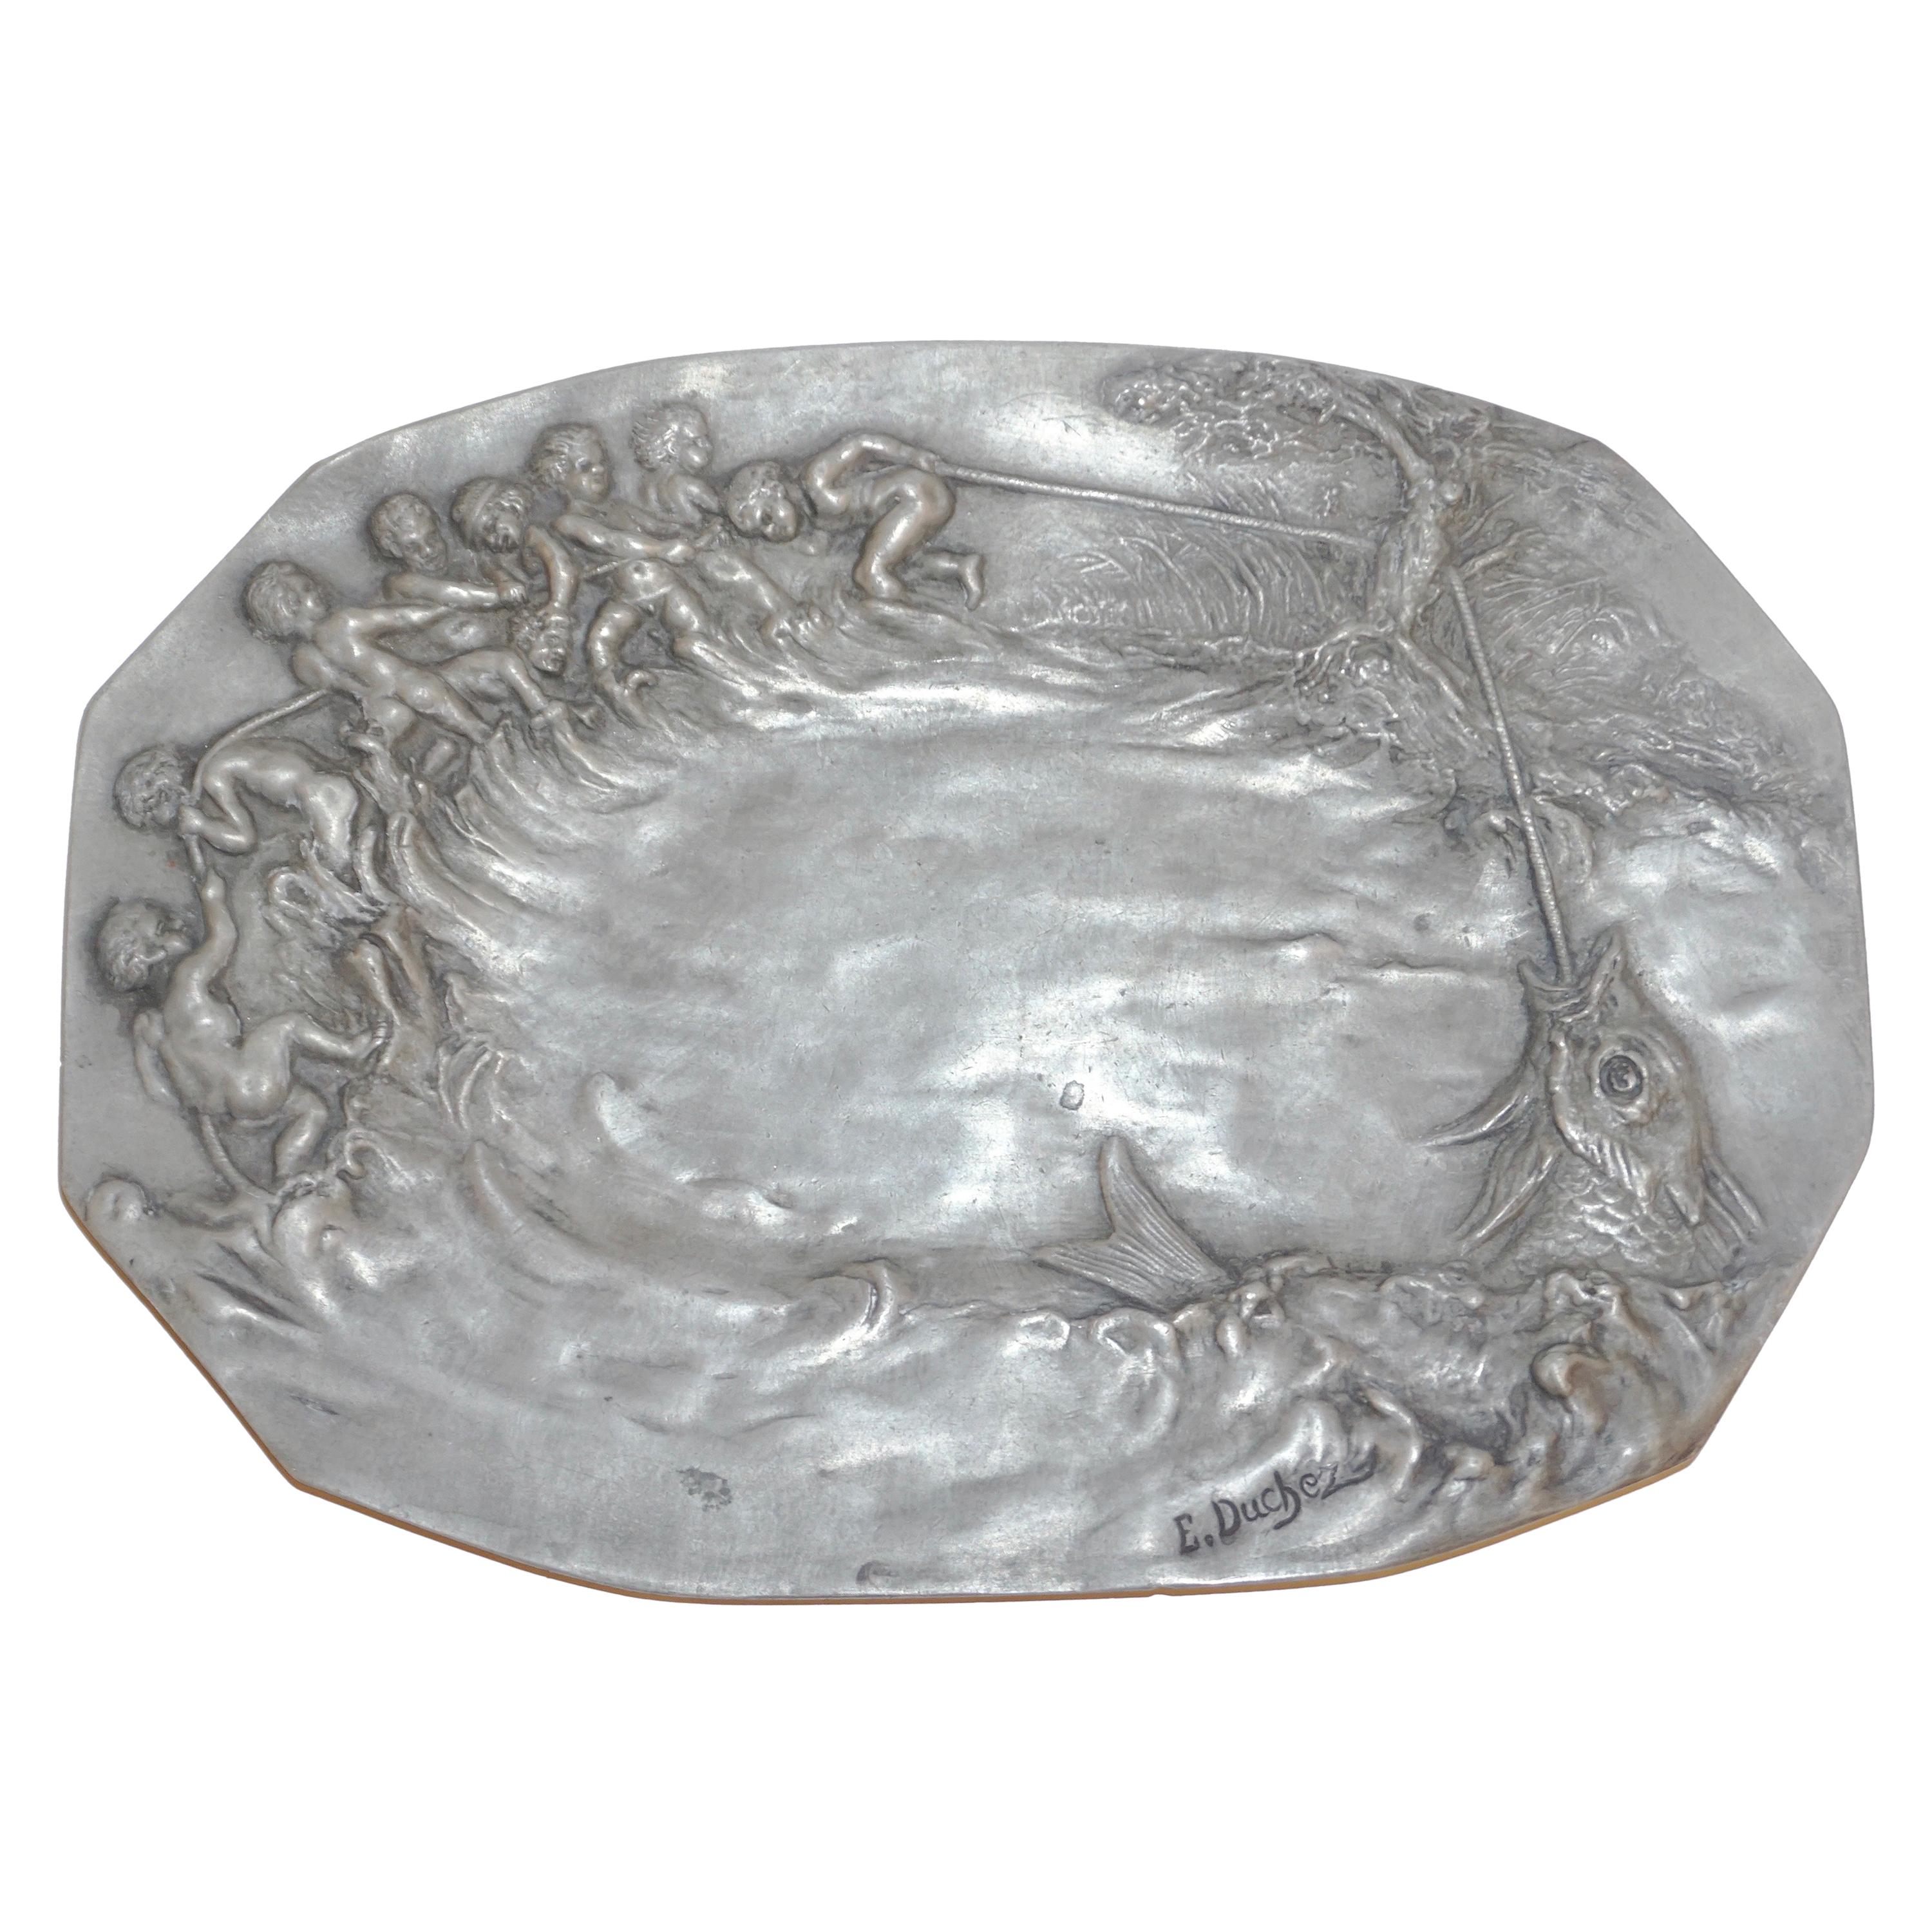 1900s French Art Nouveau Sculpted Pewter Dish with Fishing Putti in Relief For Sale